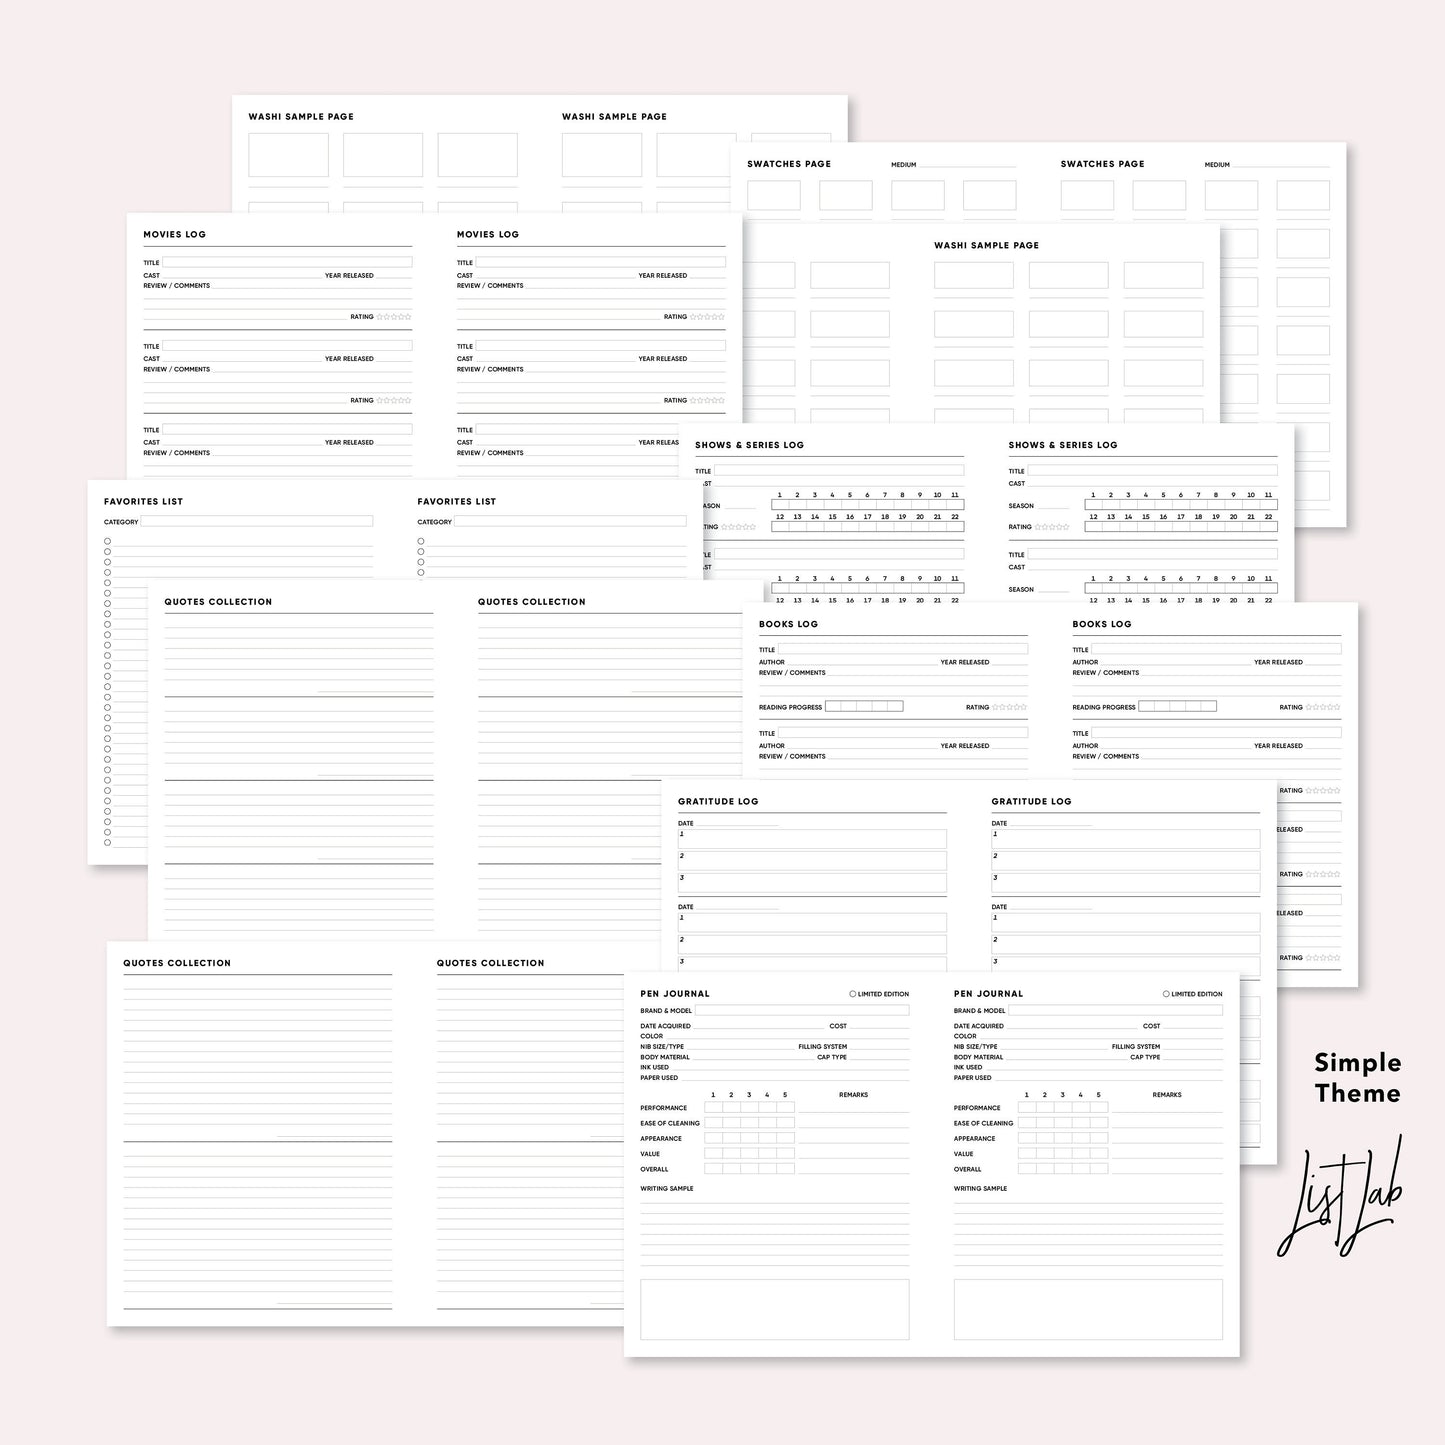 ECLP / A5 Wide Ring ME TIME KIT Printable Planner Insert Set